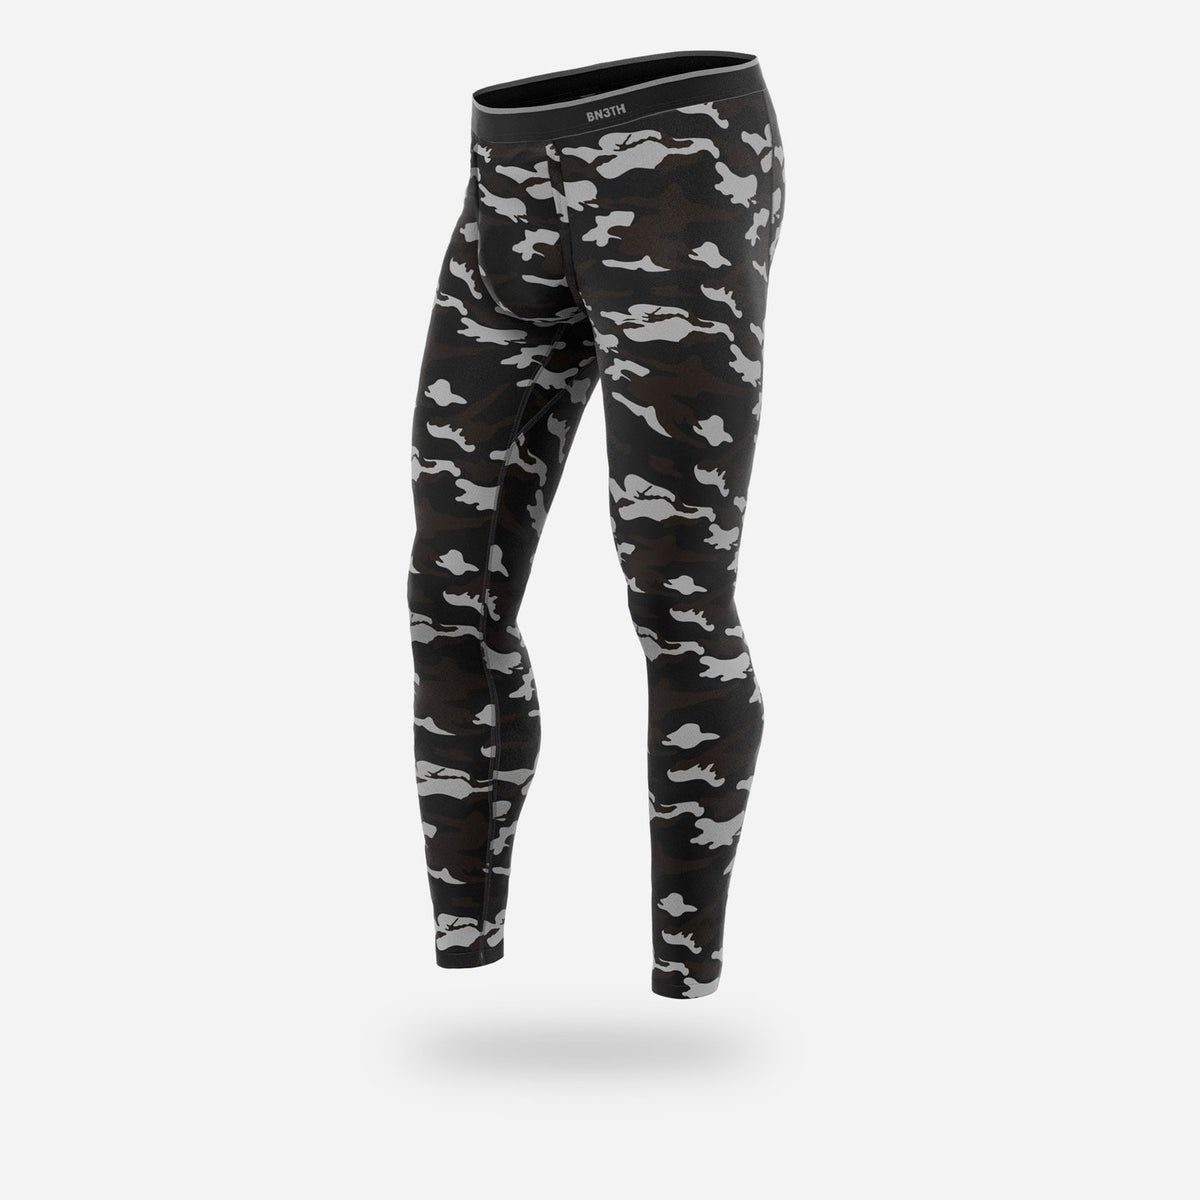 BN3TH Covert Camo Long Underwear-Small only – Indulge Boutique